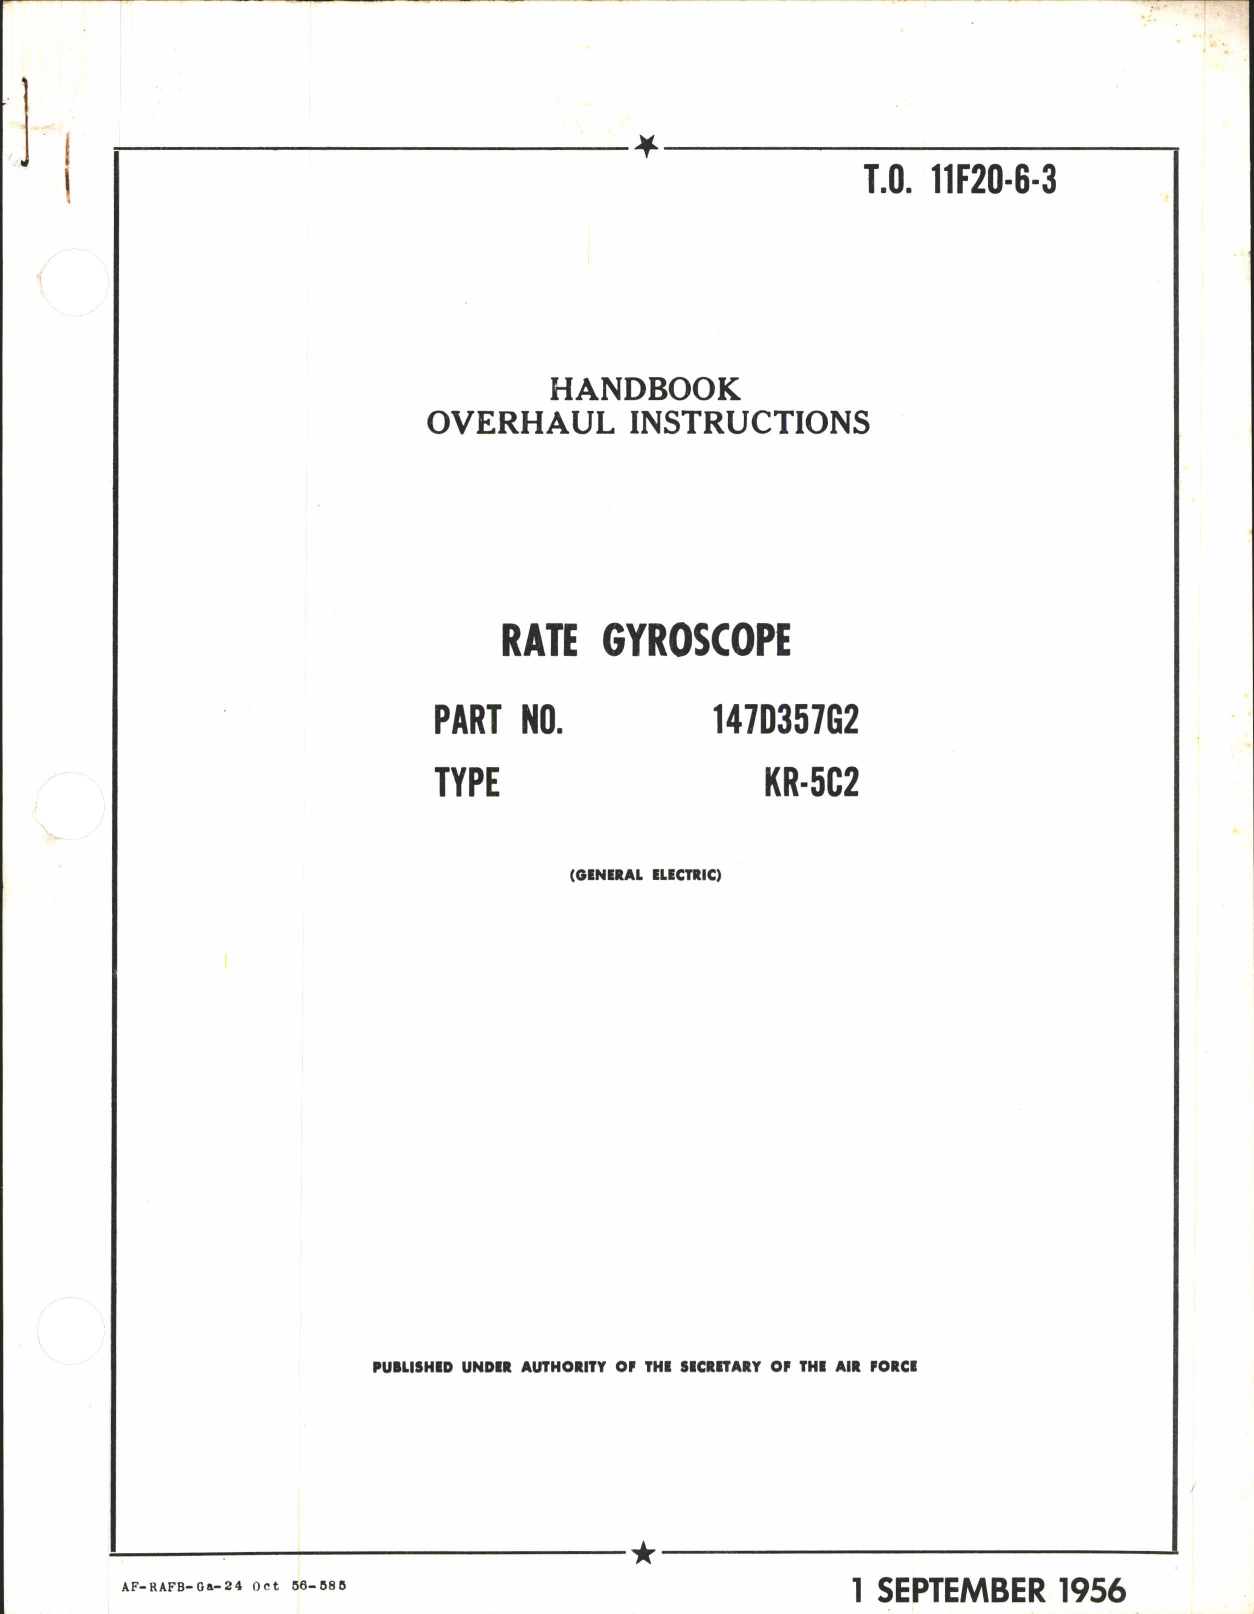 Sample page 1 from AirCorps Library document: Overhaul Instructions for Rate Gyroscope Part No. 147D357G2, Type KR-5C2